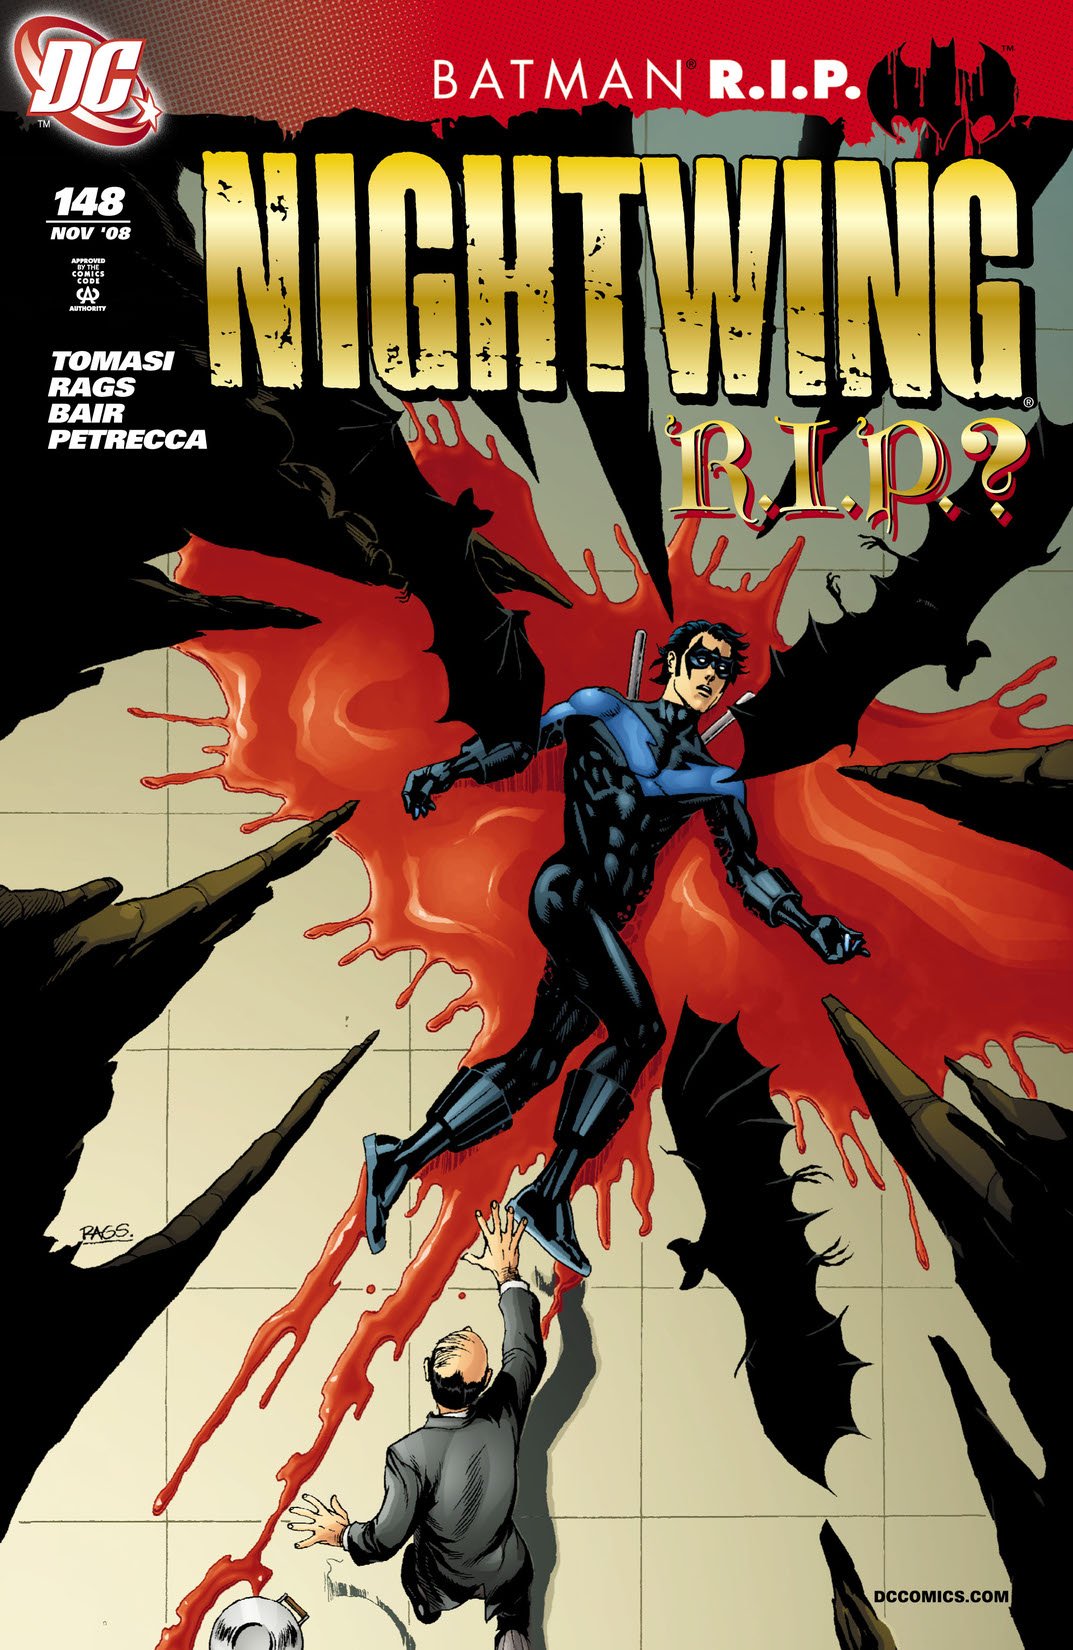 Nightwing (1996-) #148 preview images